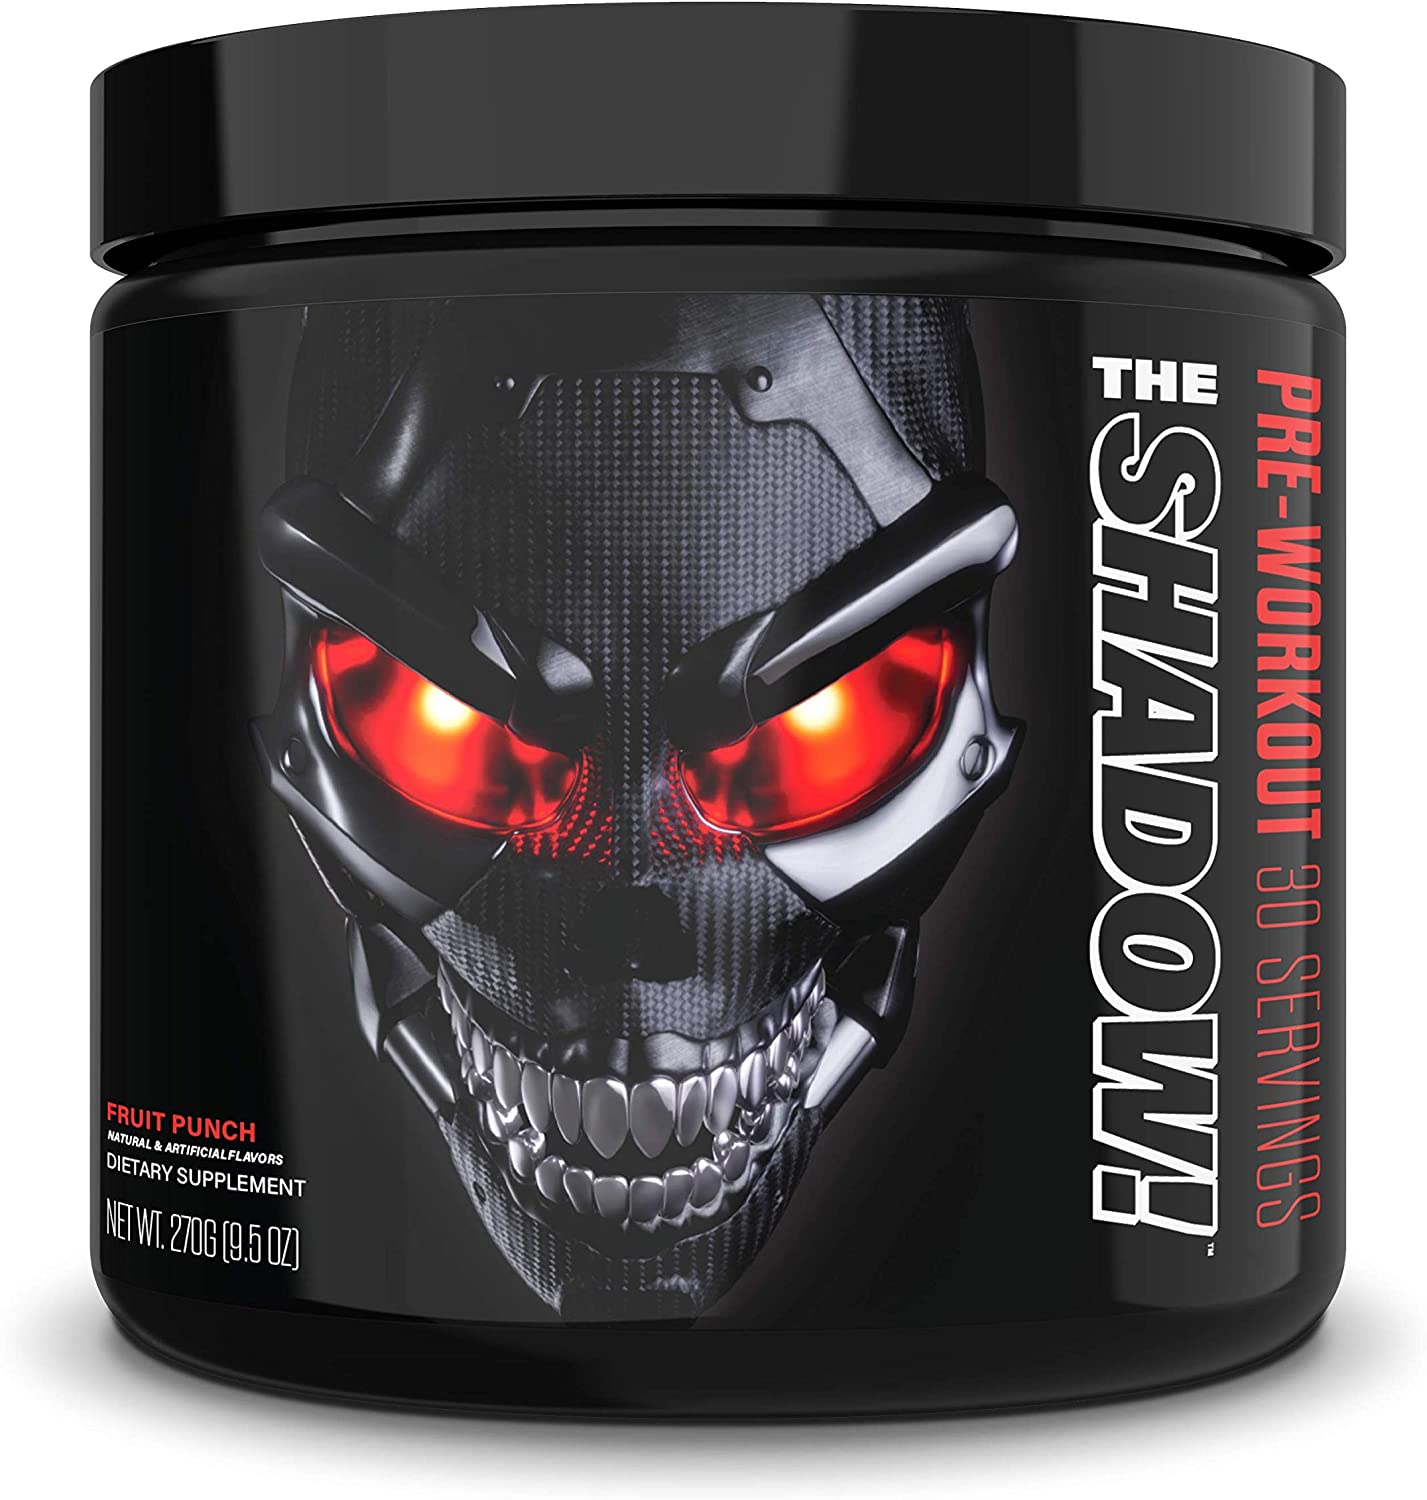 JNX The Shadow 270g / Fruit Punch